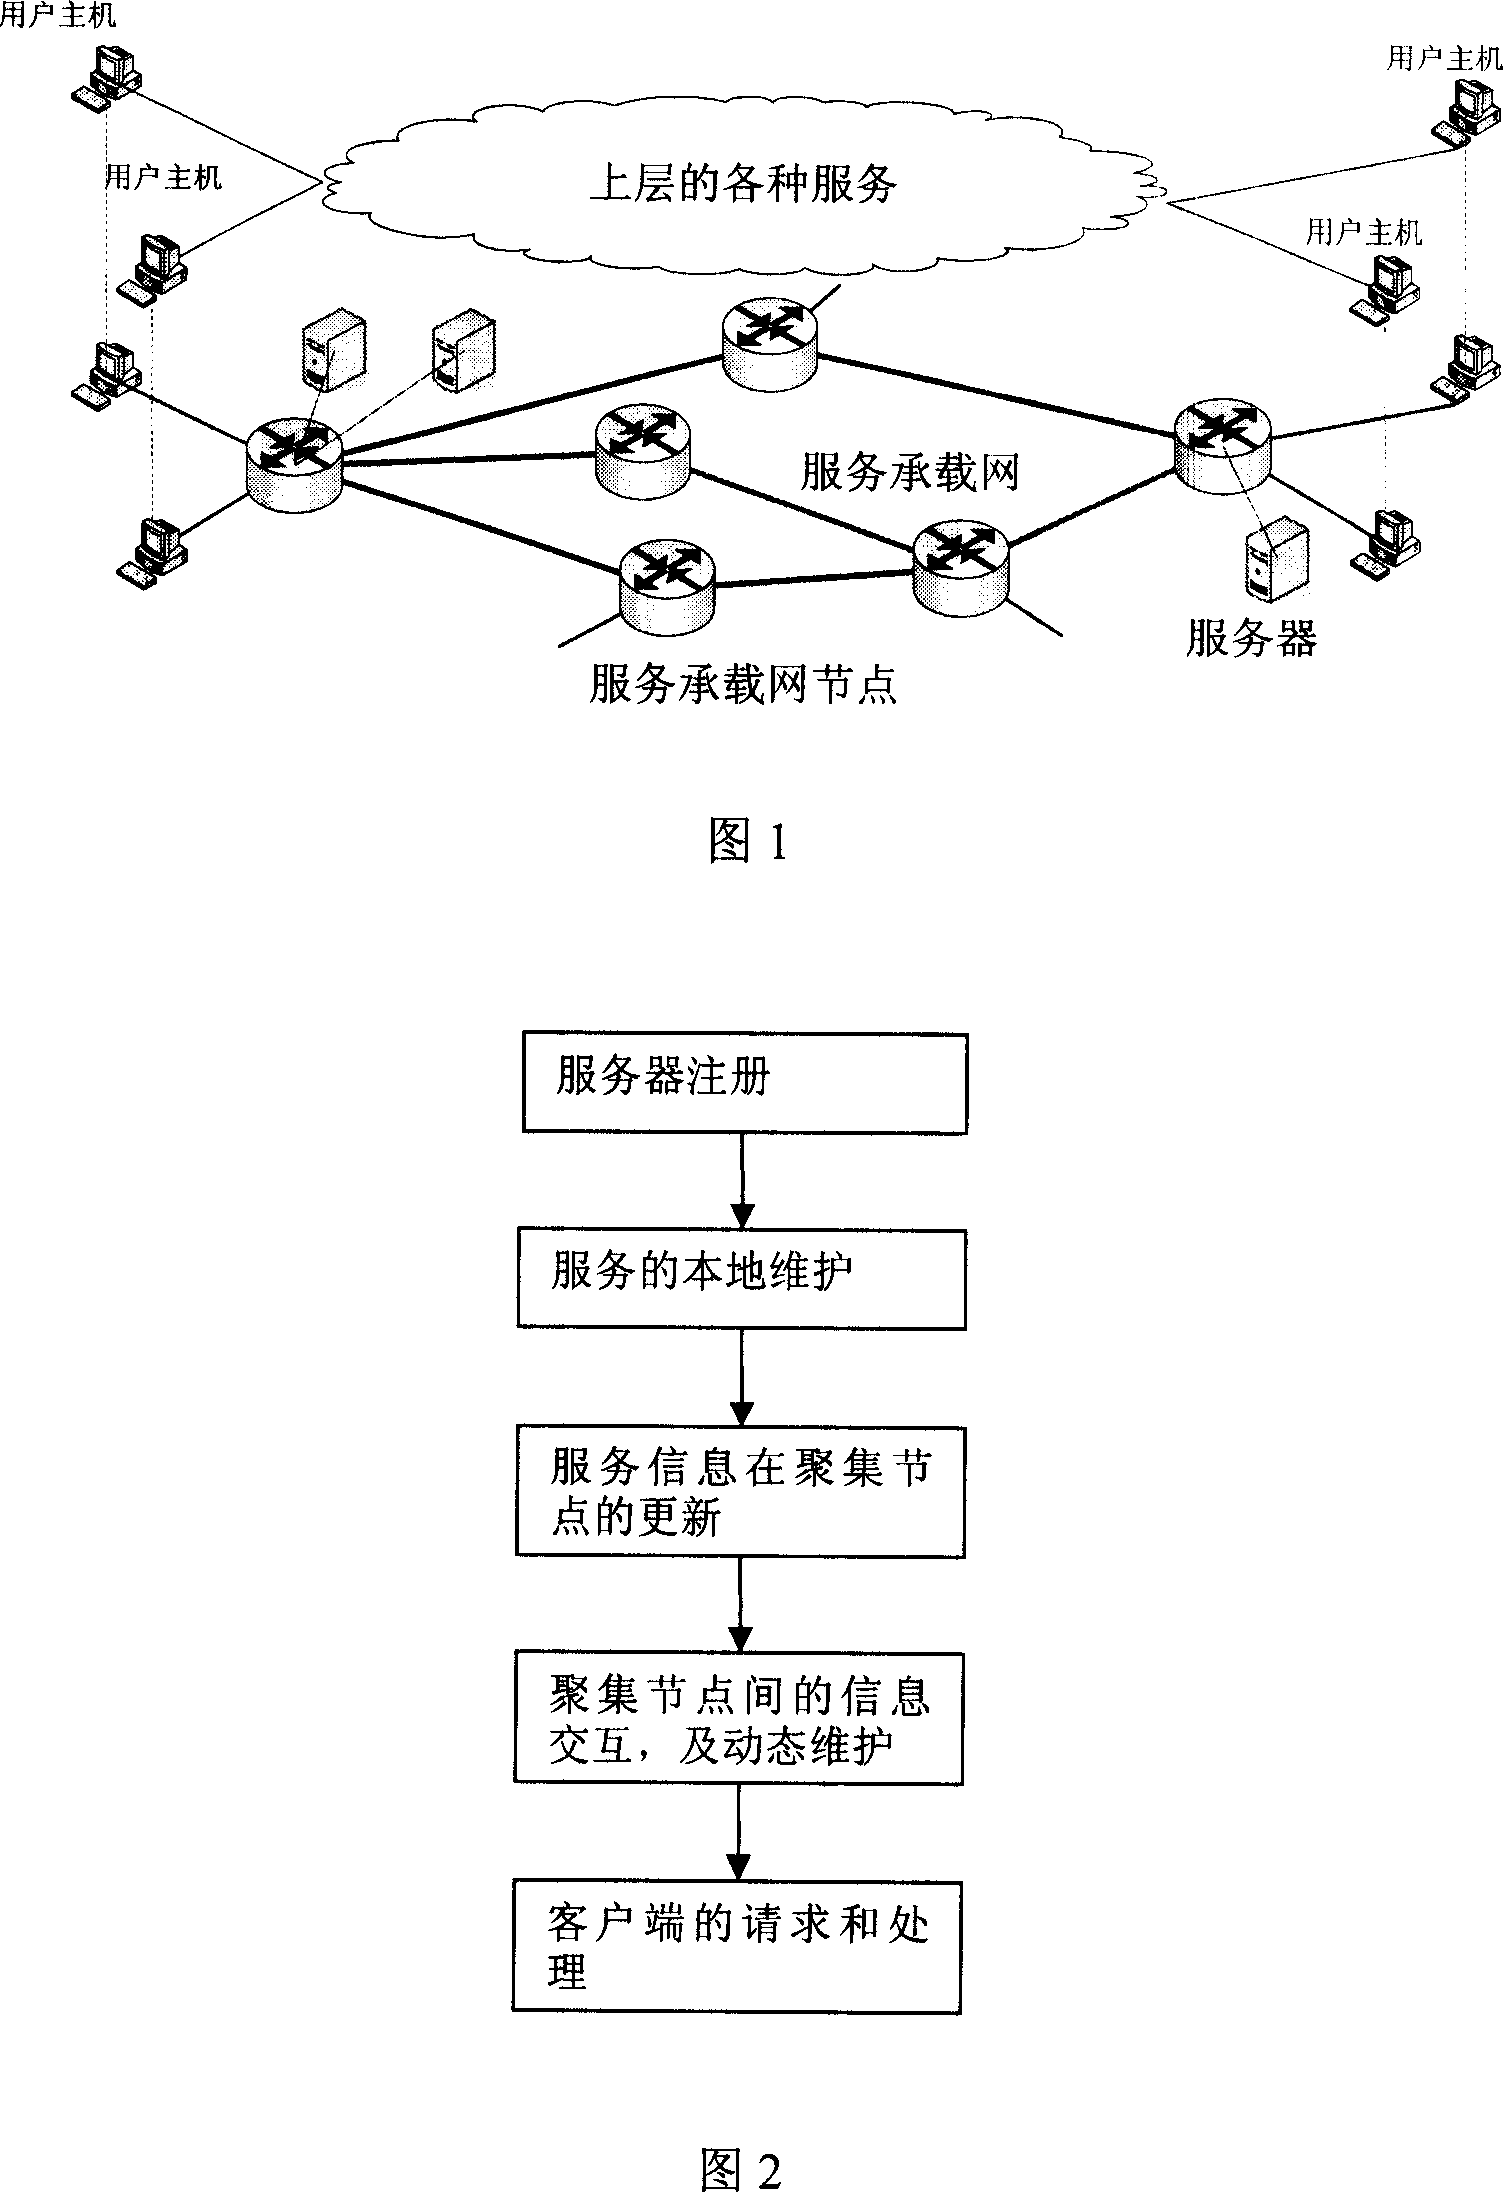 Distributed method of service management in service loading network